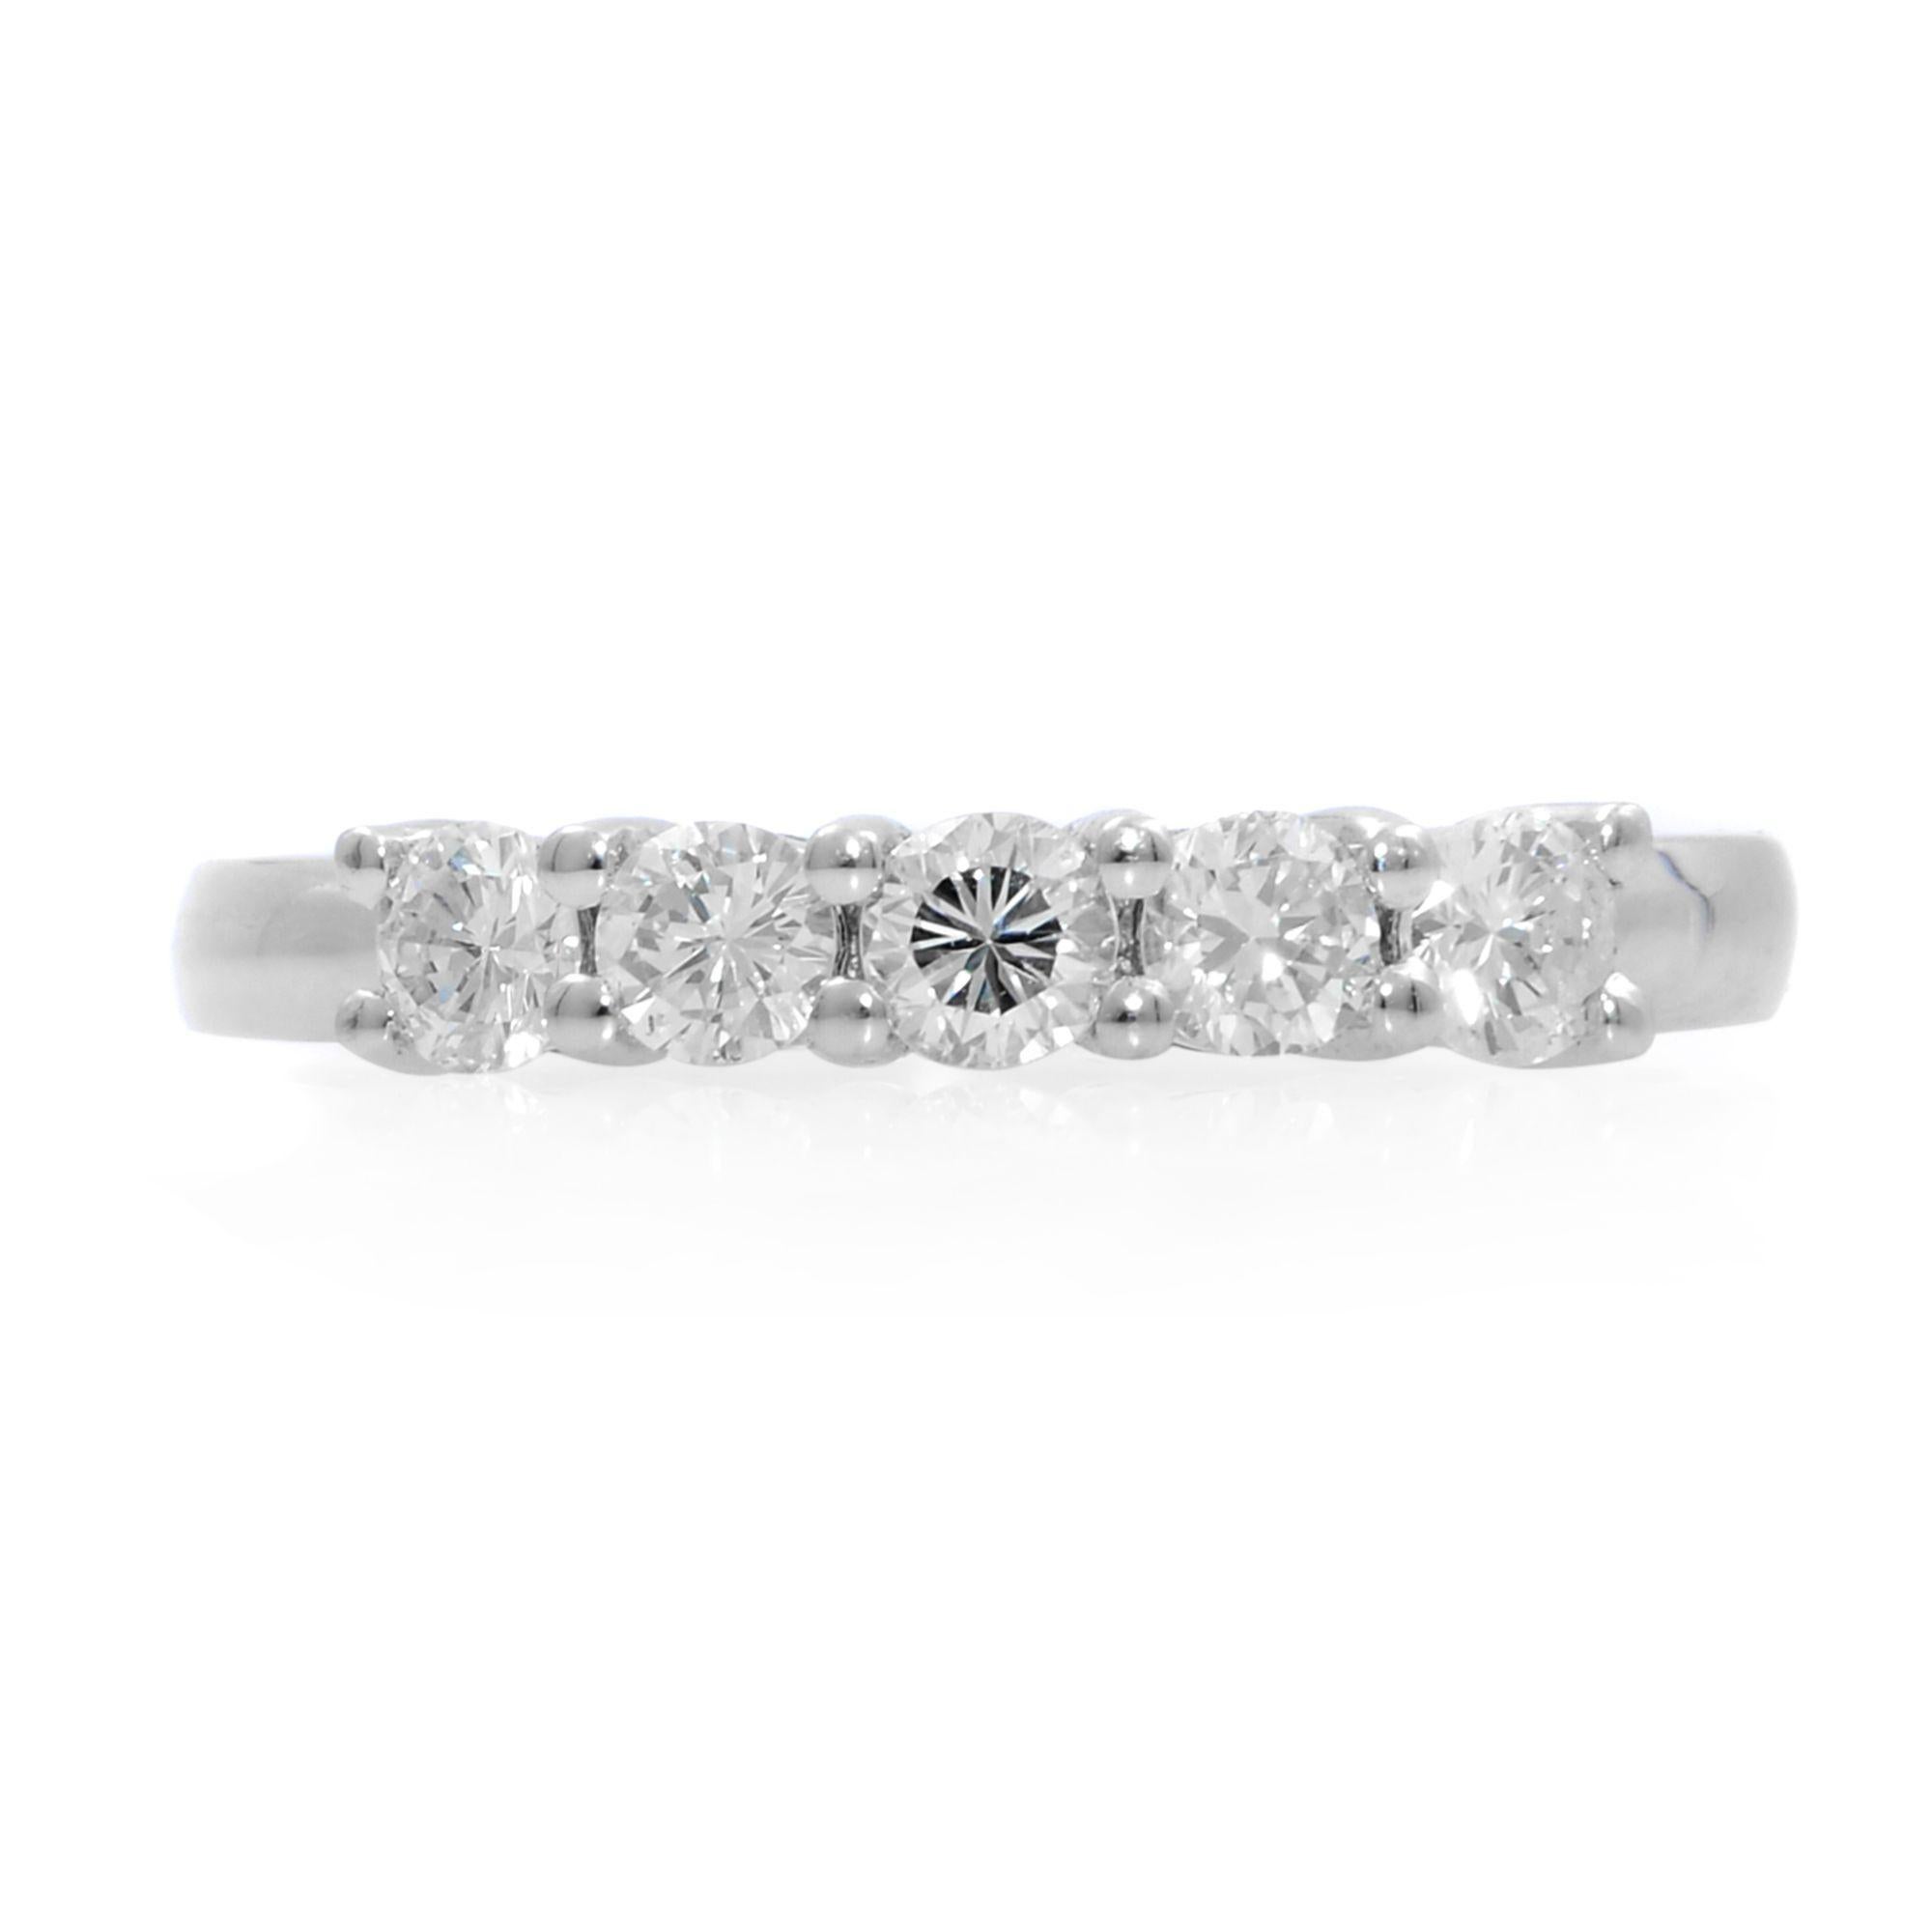 This ring if crafted in 14k white gold. Semi eternity diamond wedding band features five round diamonds across a glistening metal band. The diamonds shine brightly like stars in the night sky and are held in a prong setting for maximum brilliance.